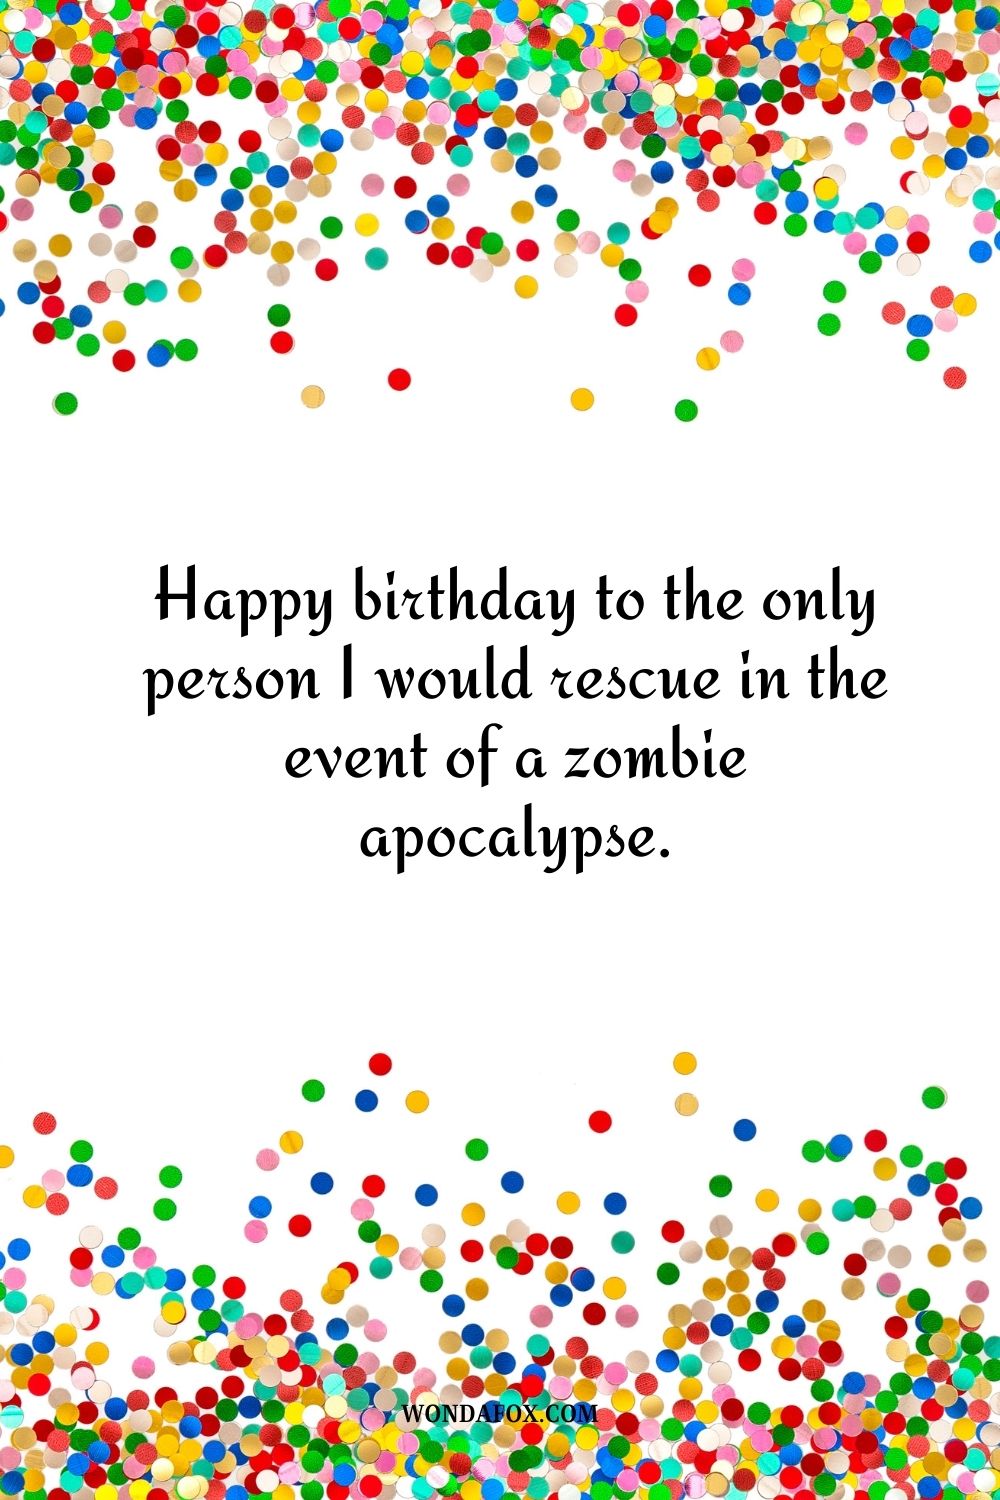 Happy birthday to the only person I would rescue in the event of a zombie apocalypse.